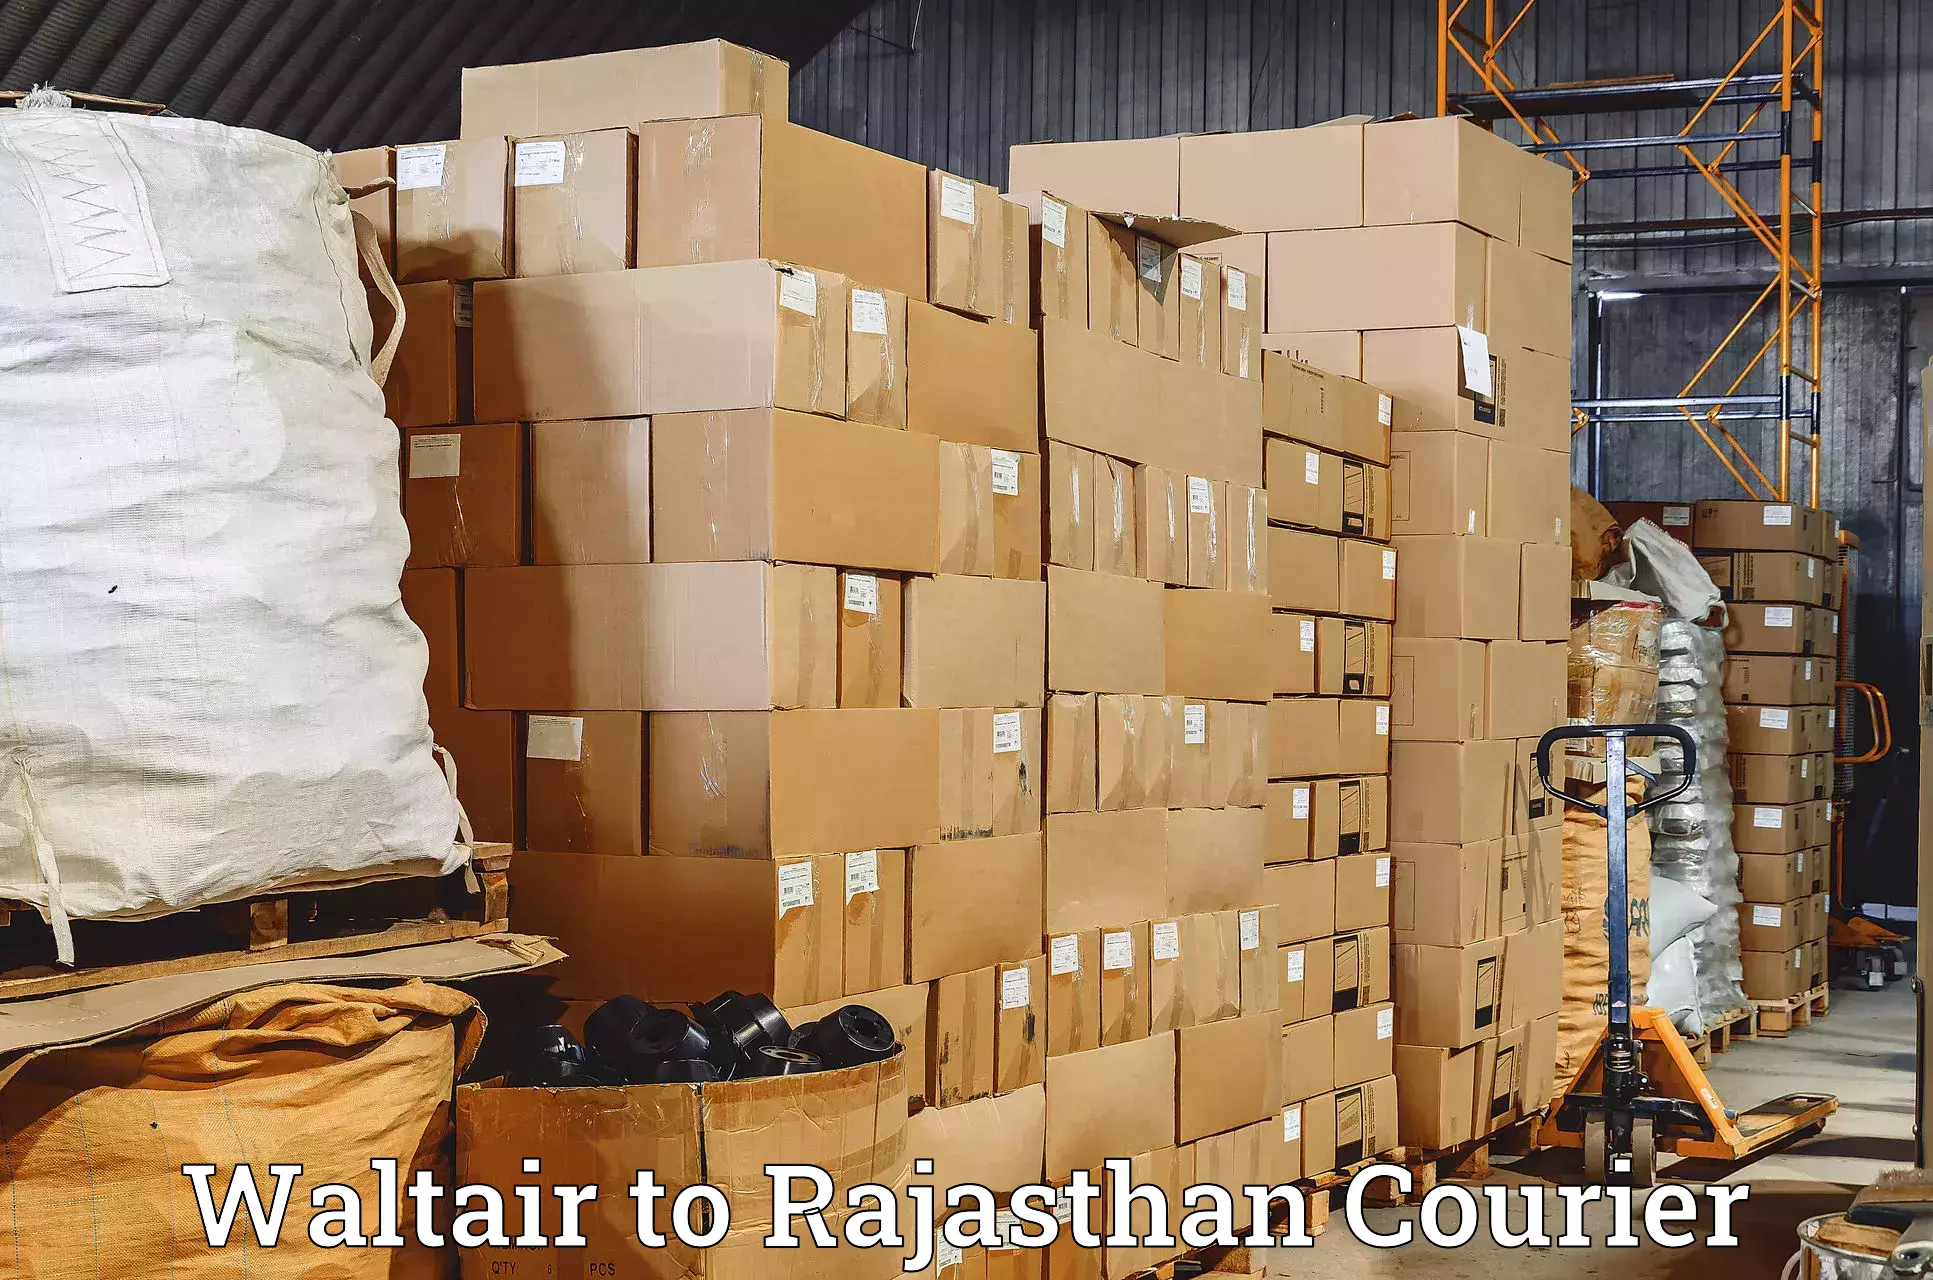 Easy access courier services Waltair to Pilani